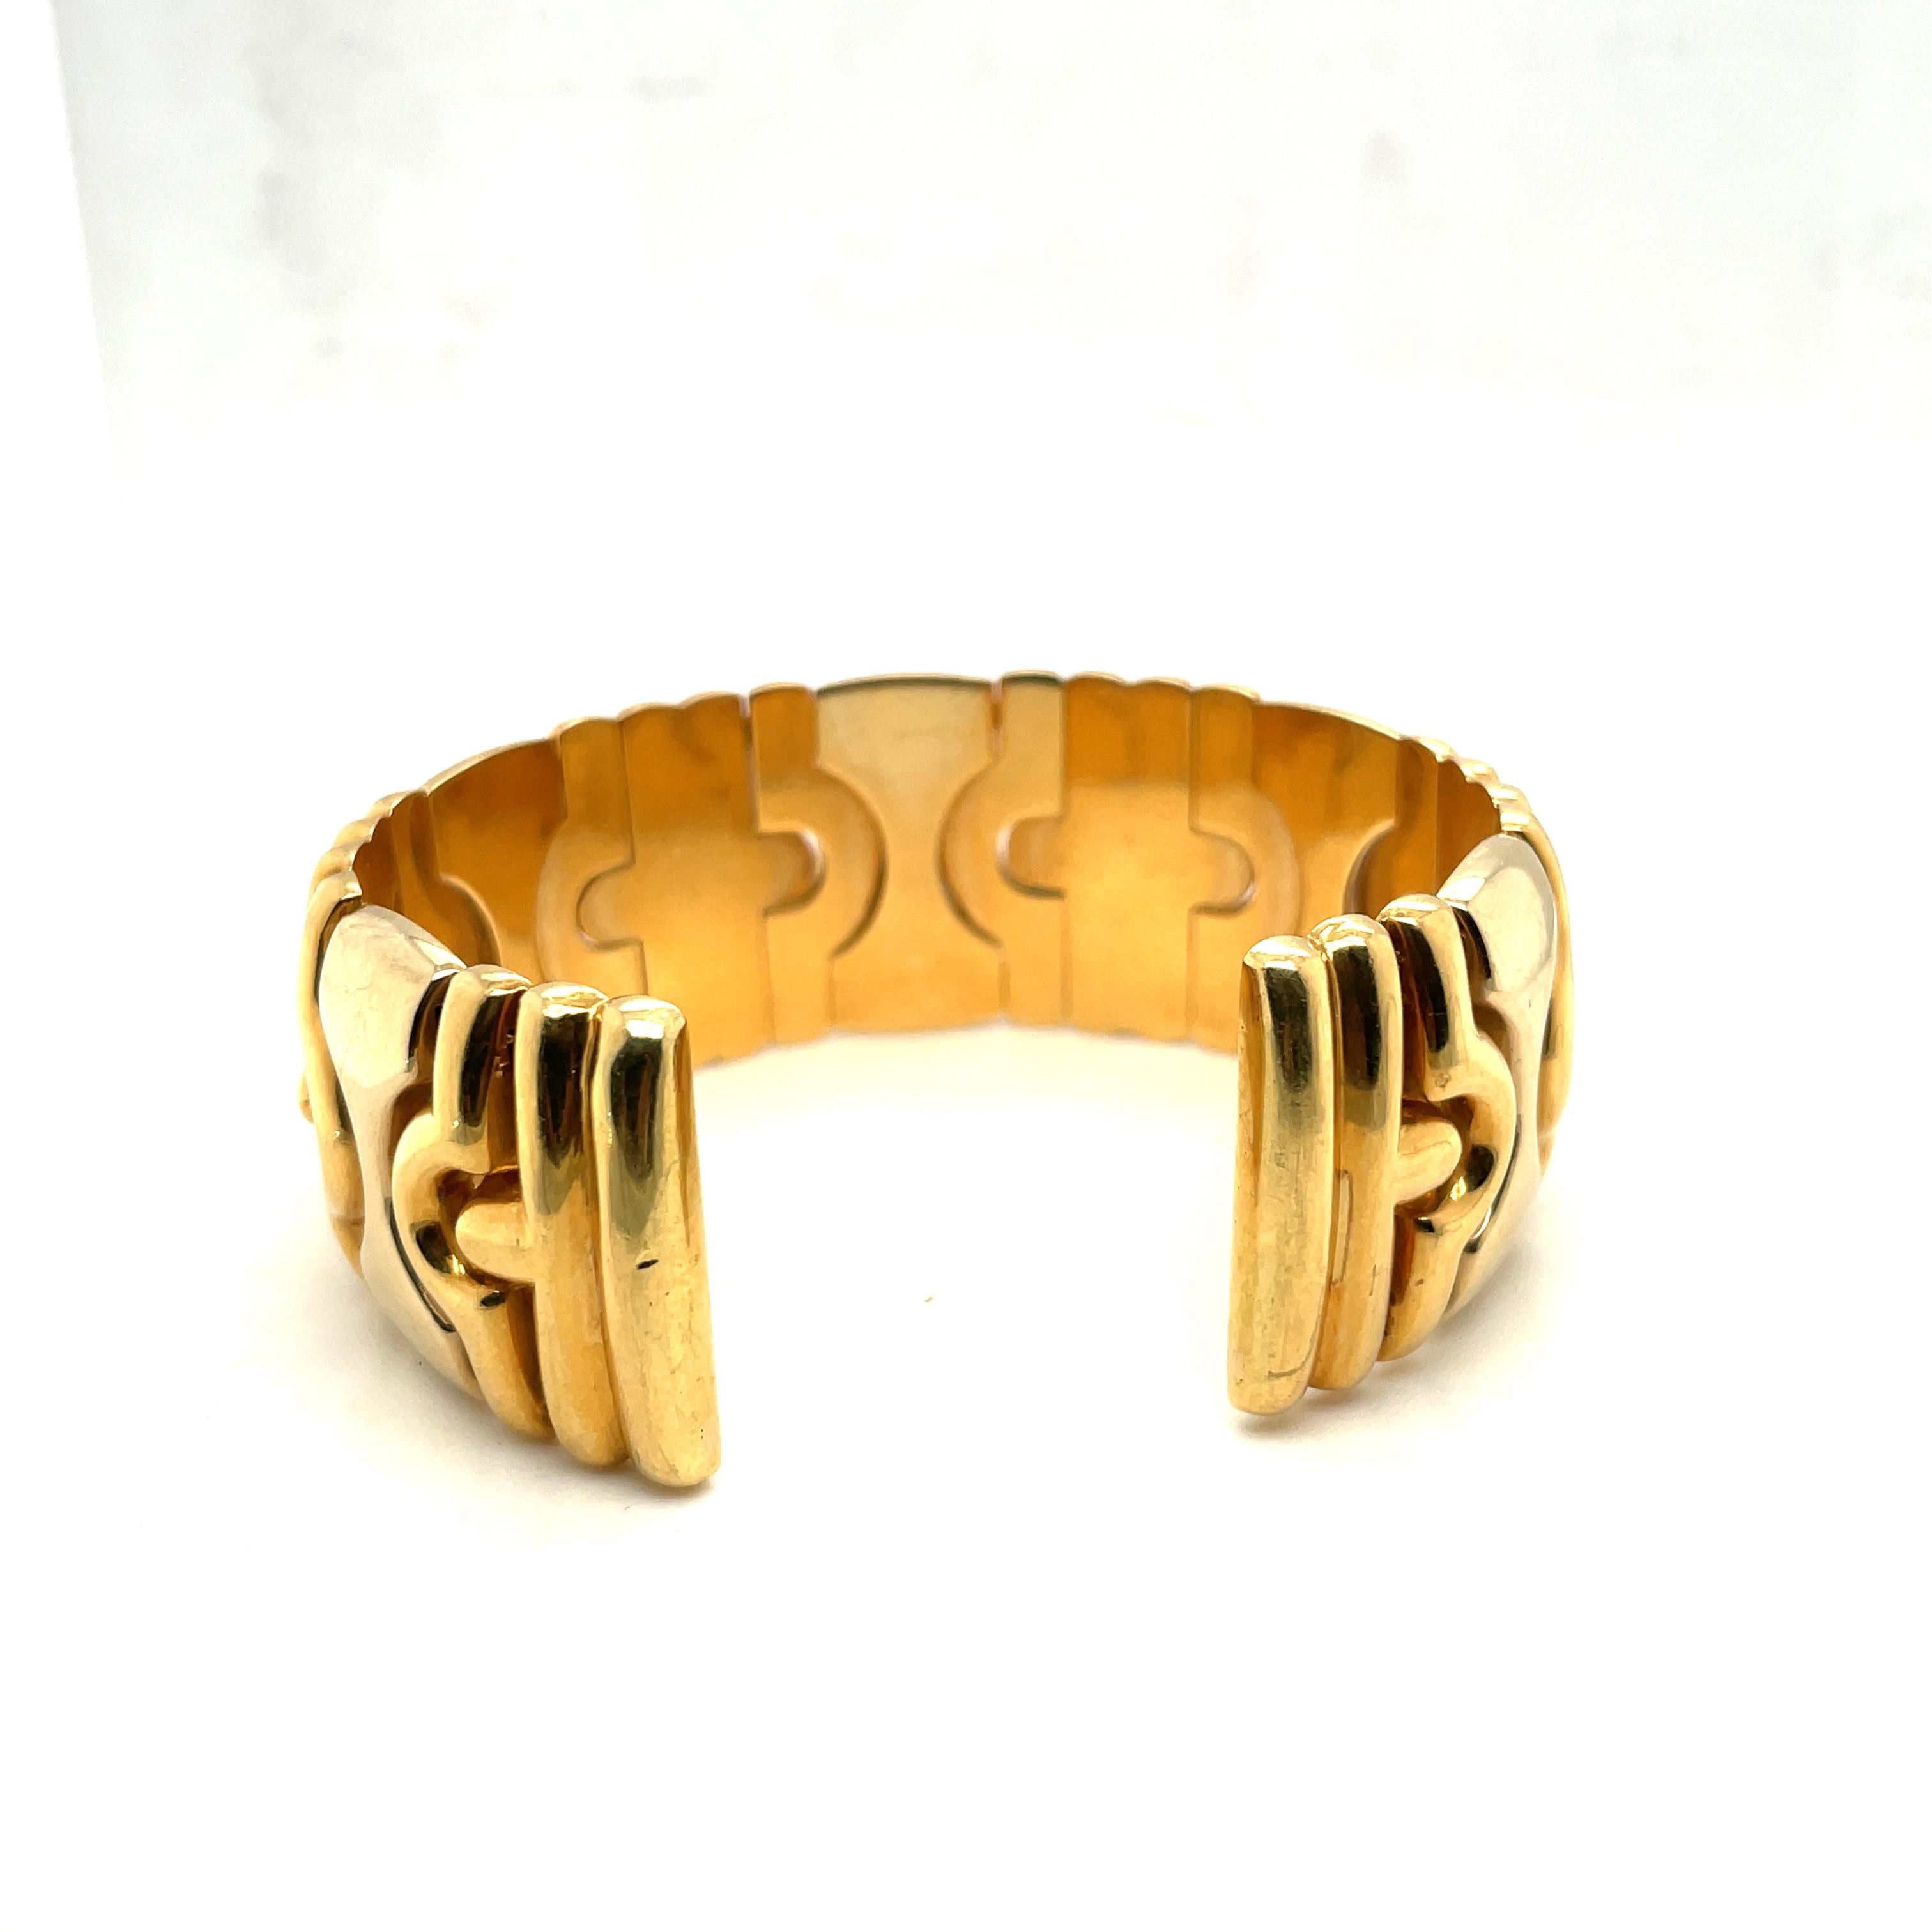 18K White & Yellow Gold Cuff Bangle Bracelet In Good Condition For Sale In New York, NY